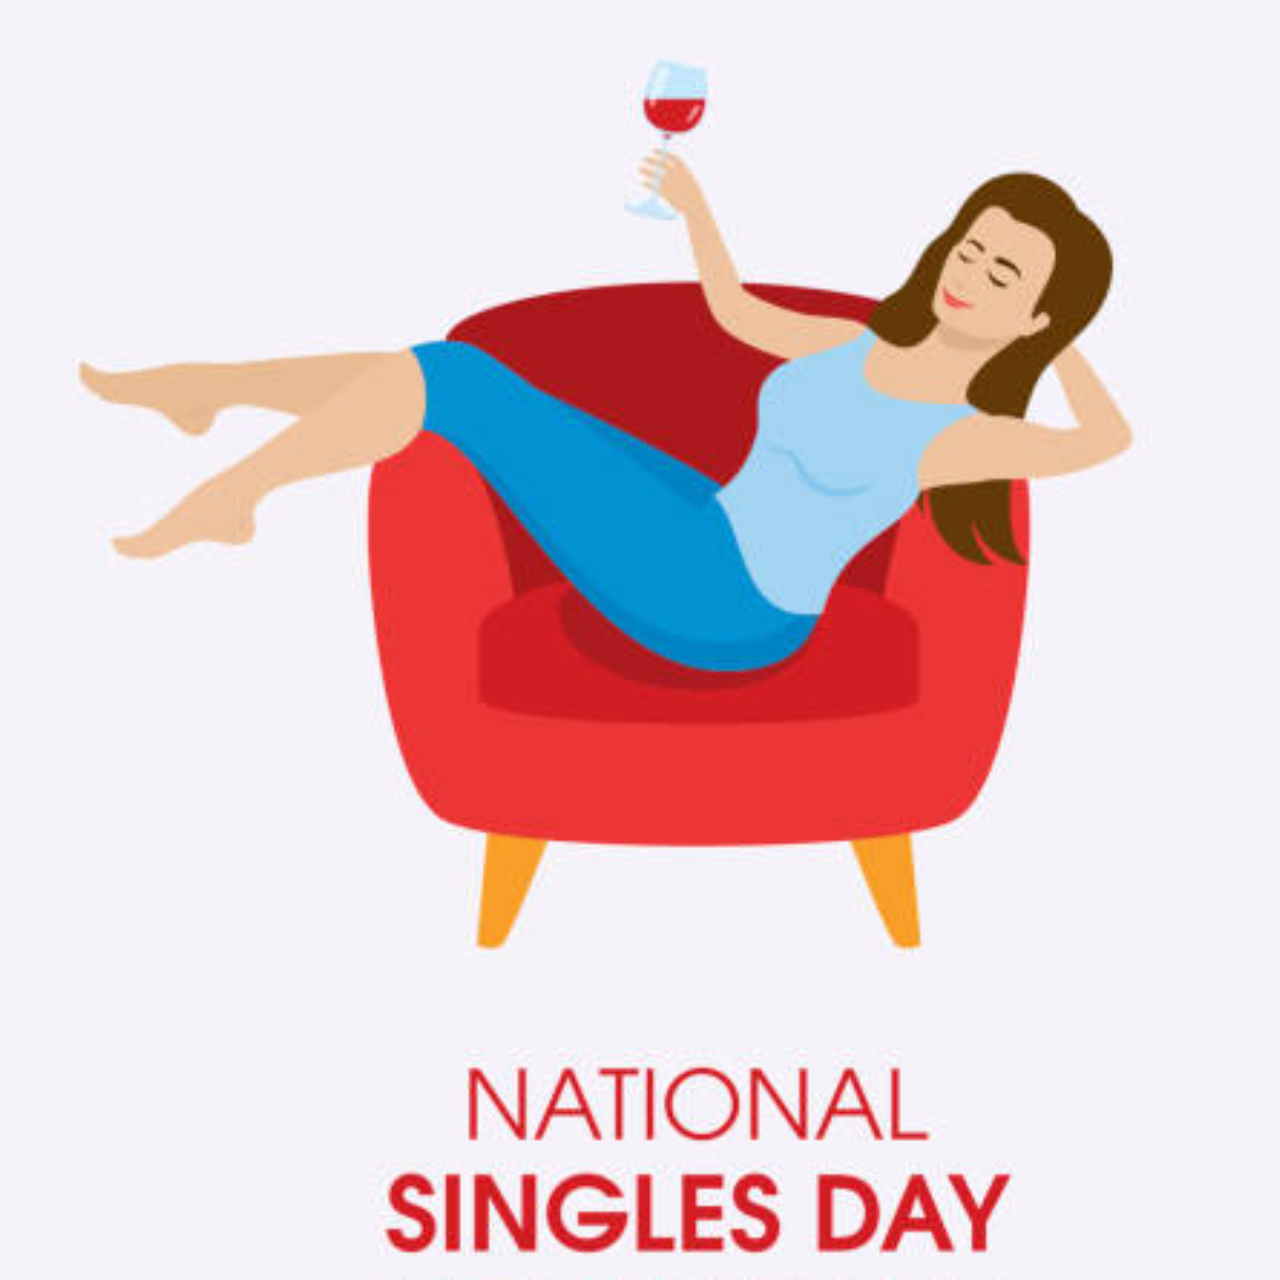 National Singles Day 2022 Quotes, Messages, Memes, Images, Greetings and Social Media Posts